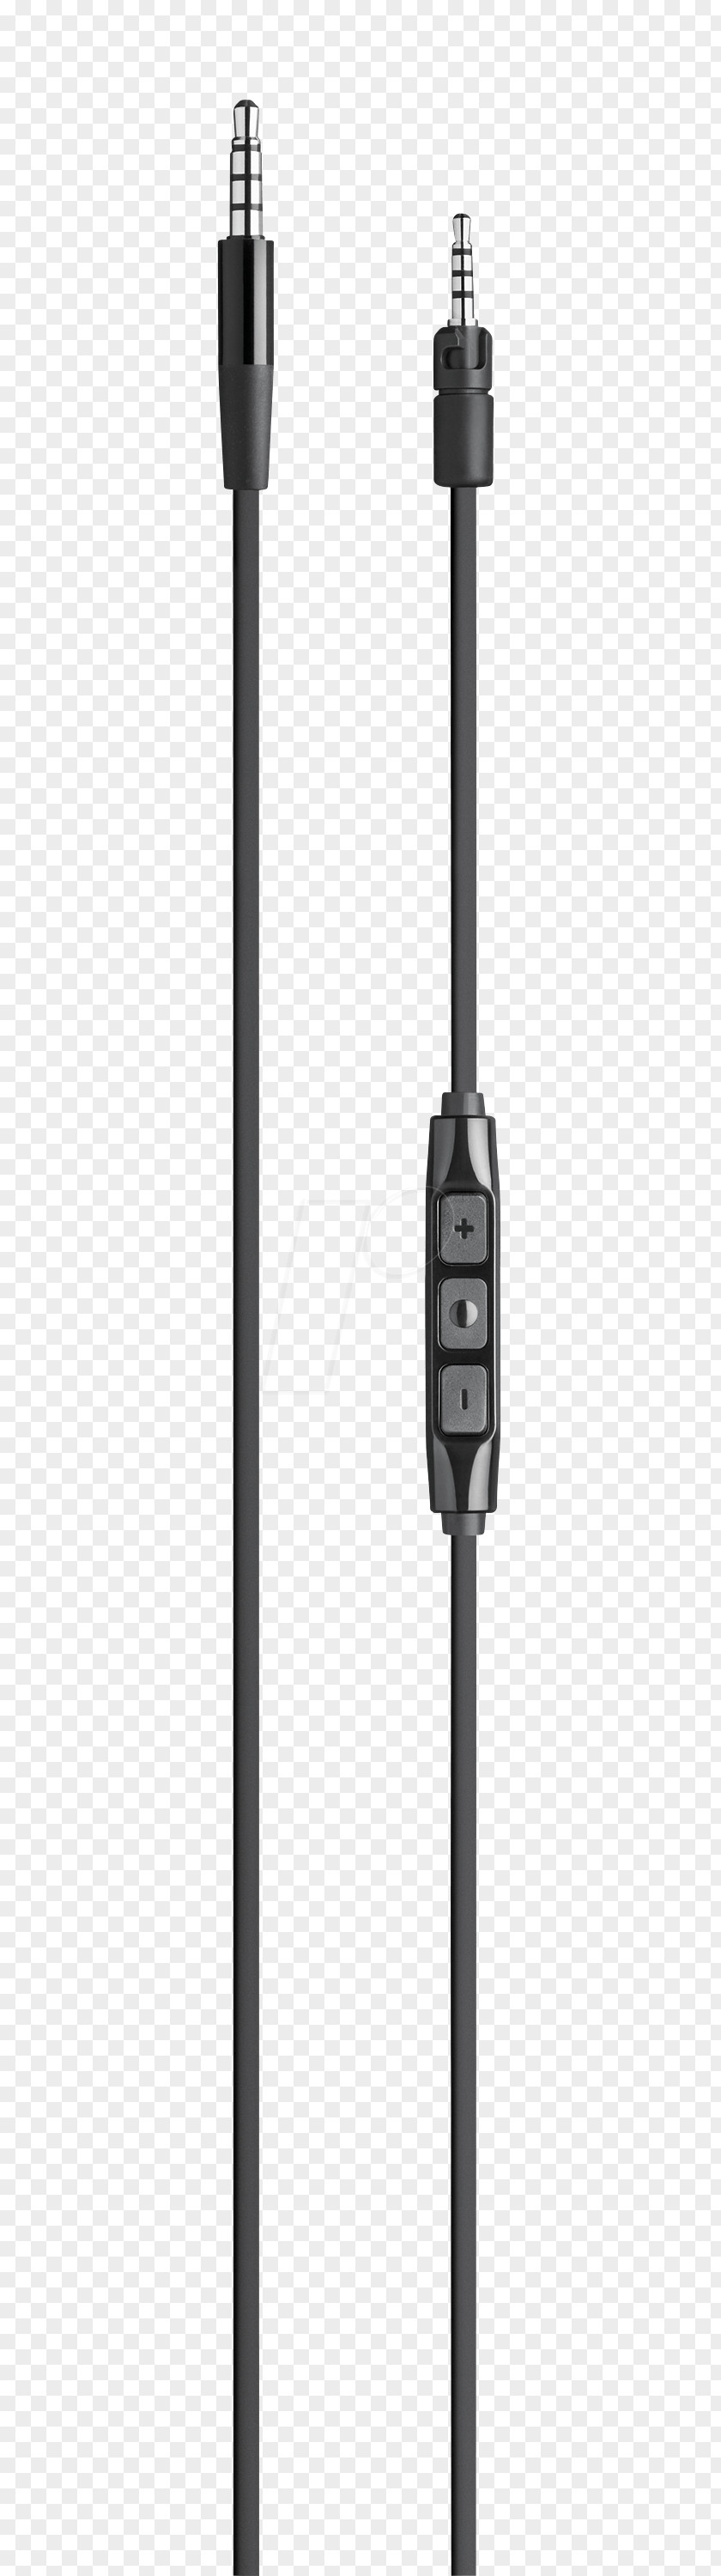 Iphone Electrical Cable IPhone Phone Connector Griffin Technology Apple PNG